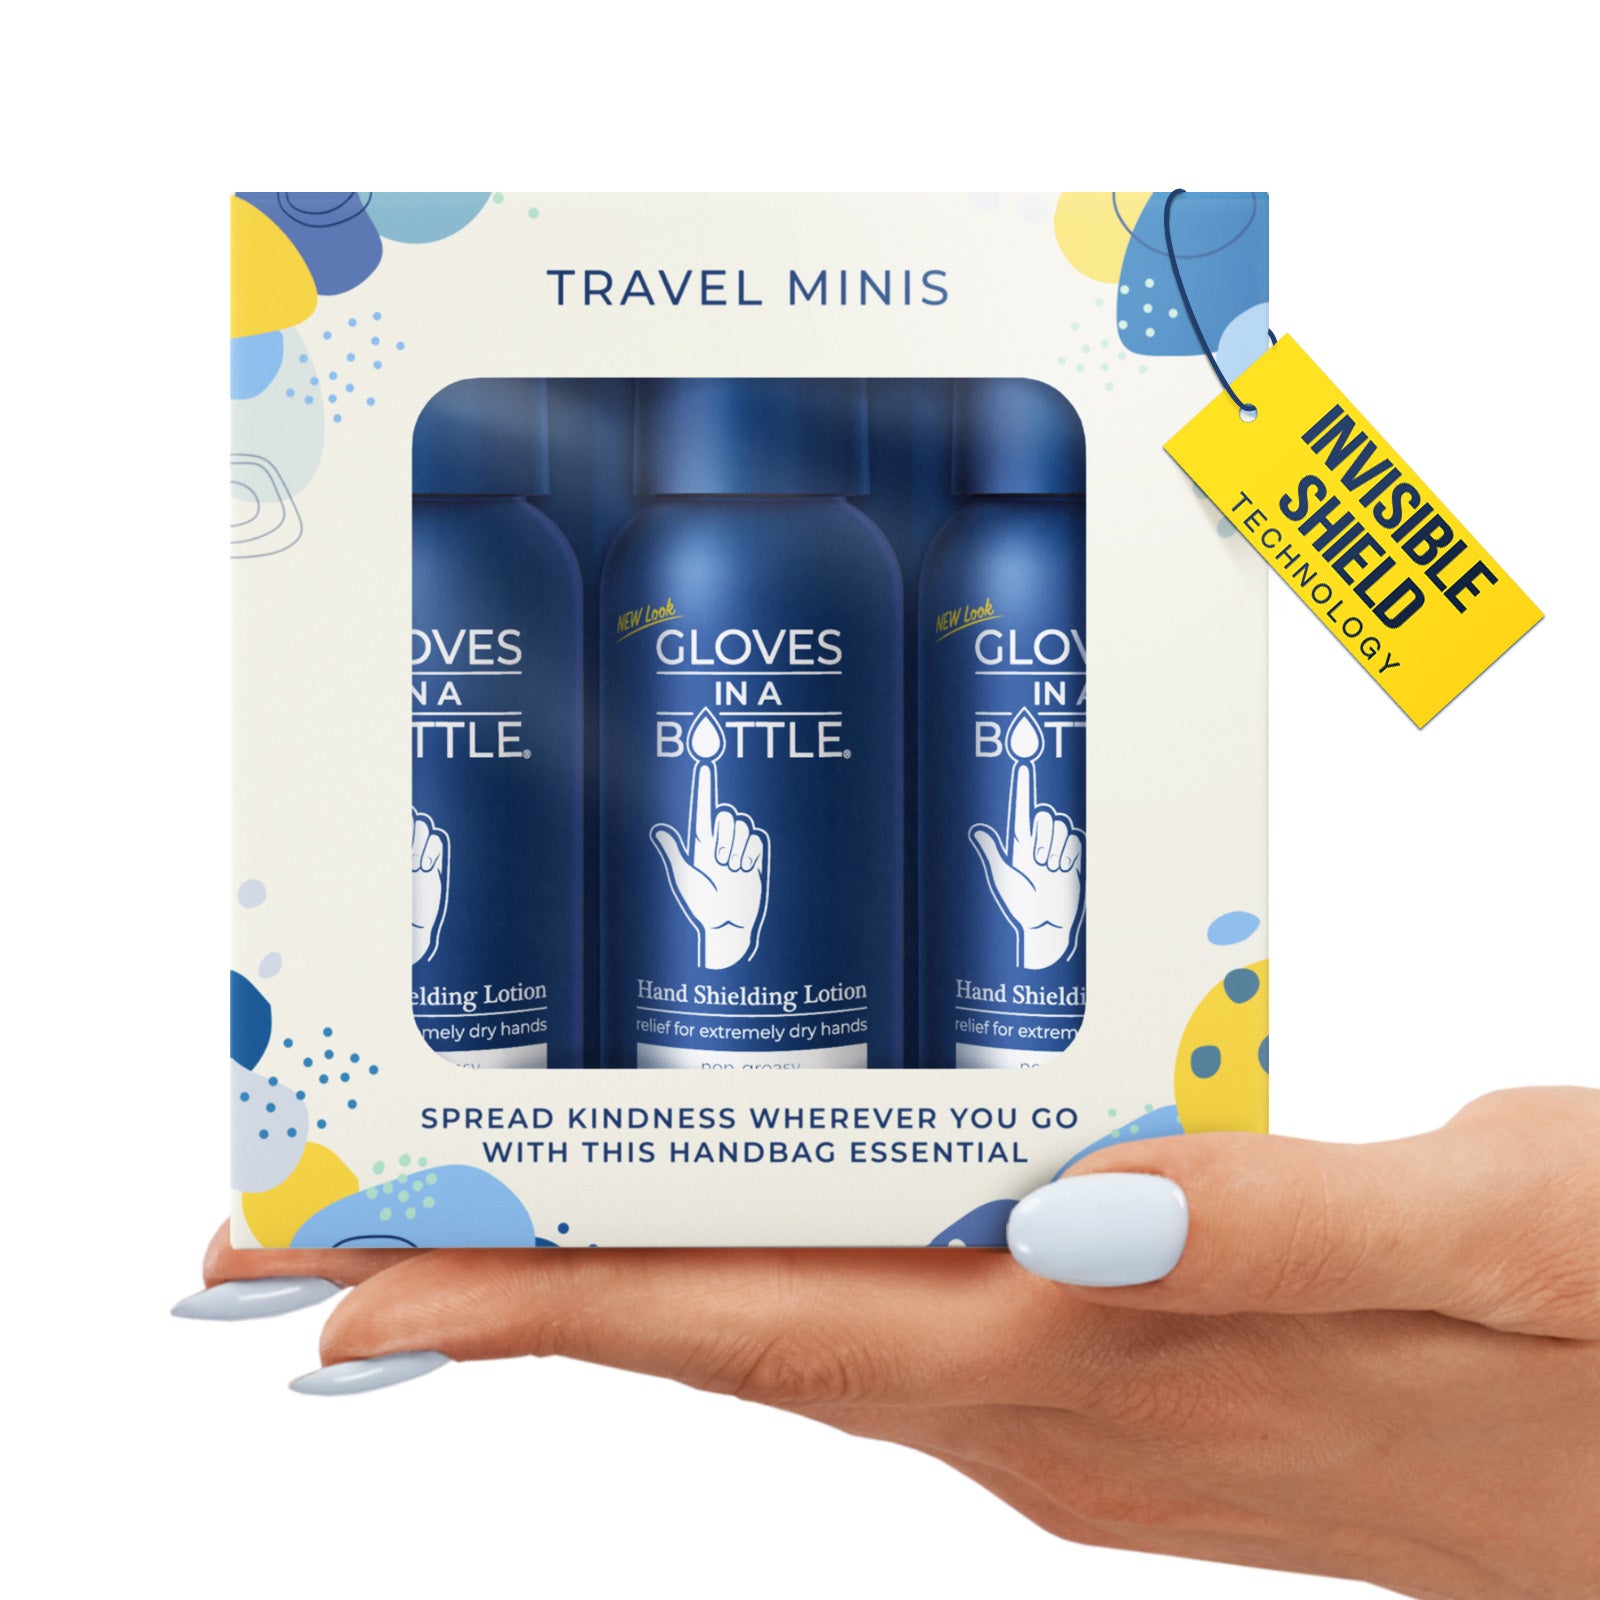 New Gloves In A Bottle "Travel Minis"  - 3x2oz Gift Pack